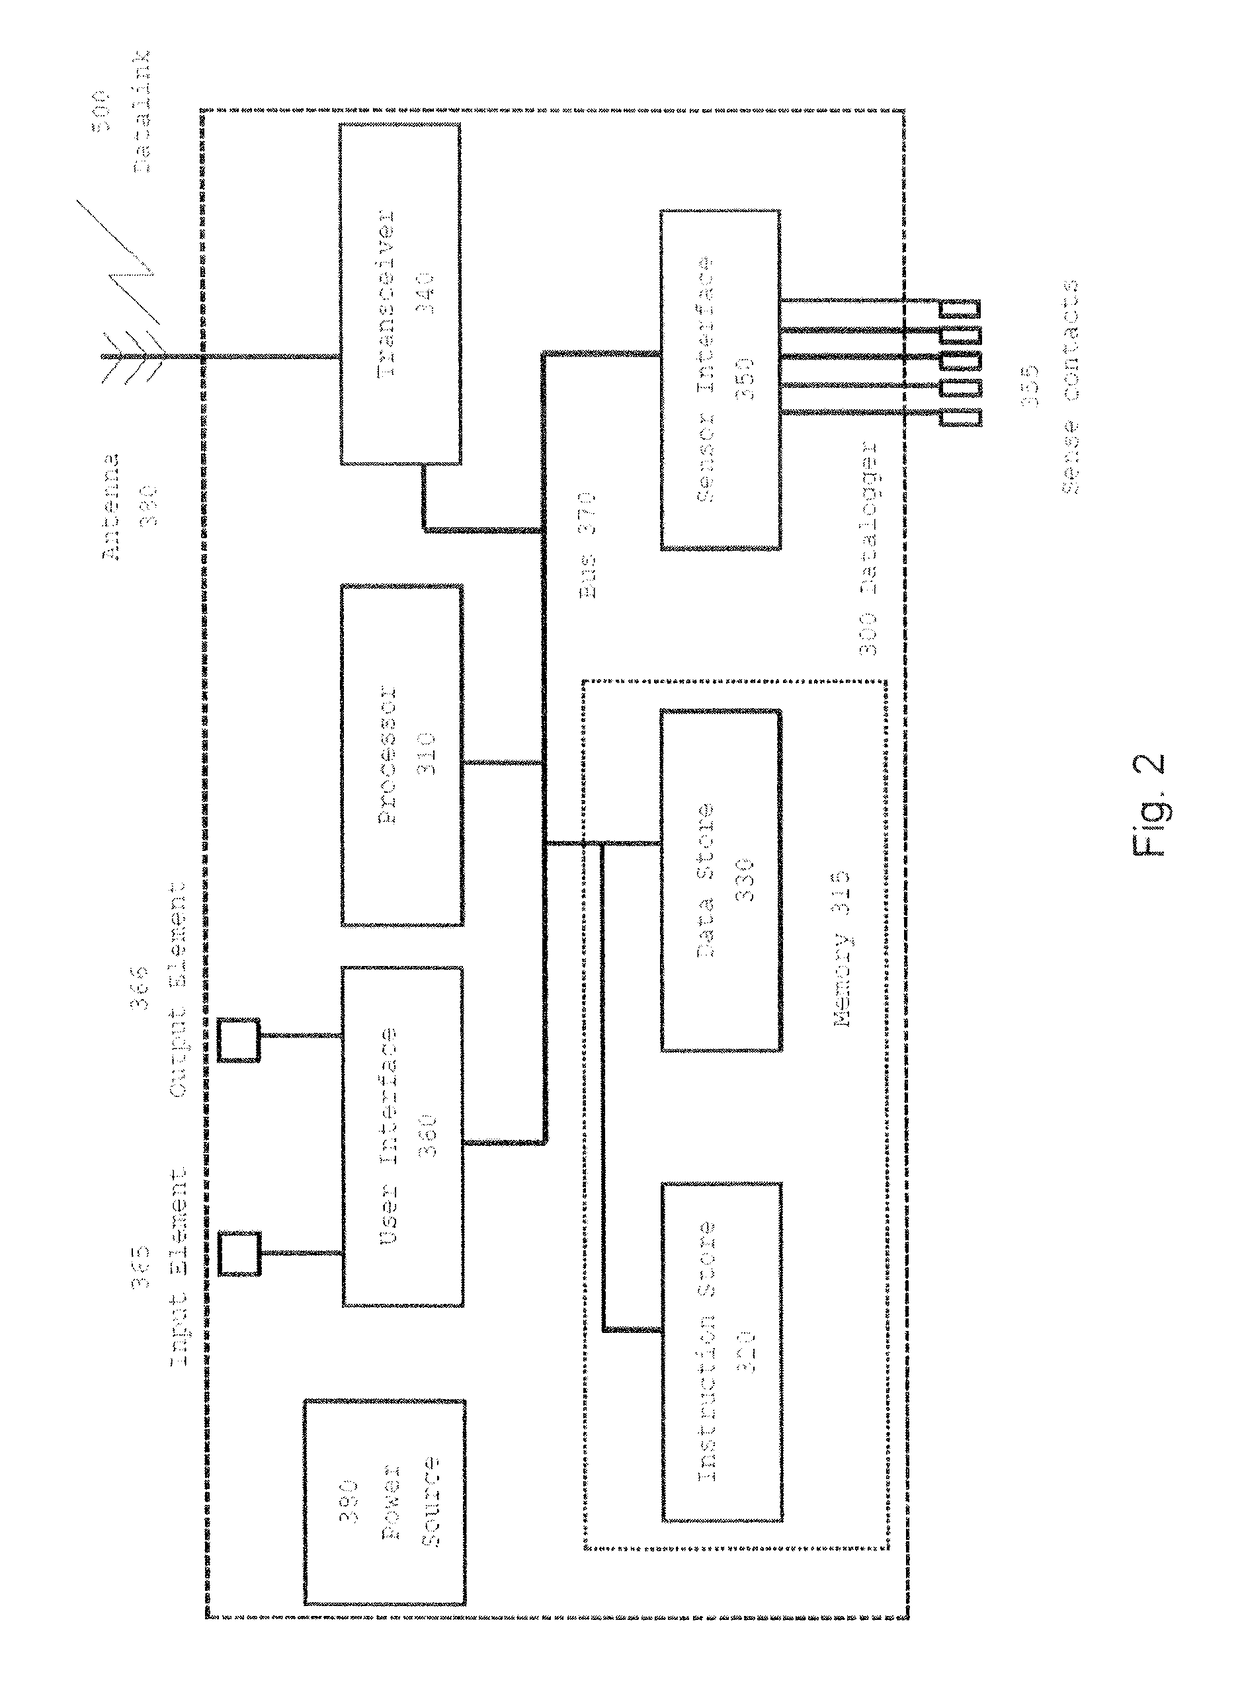 Monitoring and displaying an absorption state of an absorbent article